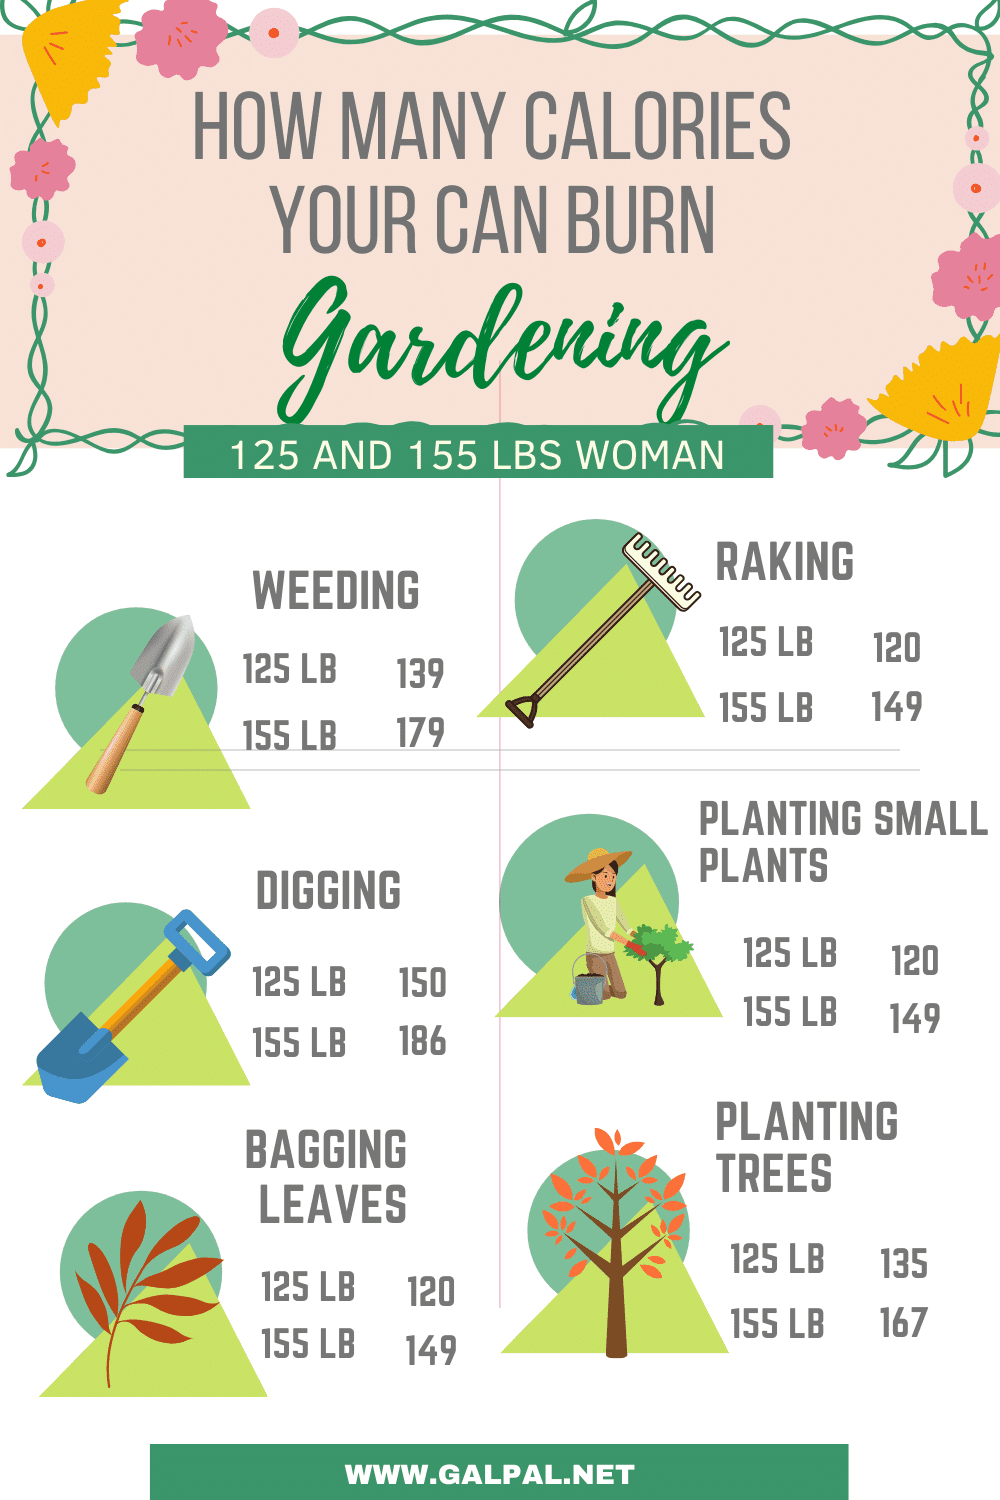 How many calories can you burn gardening? 